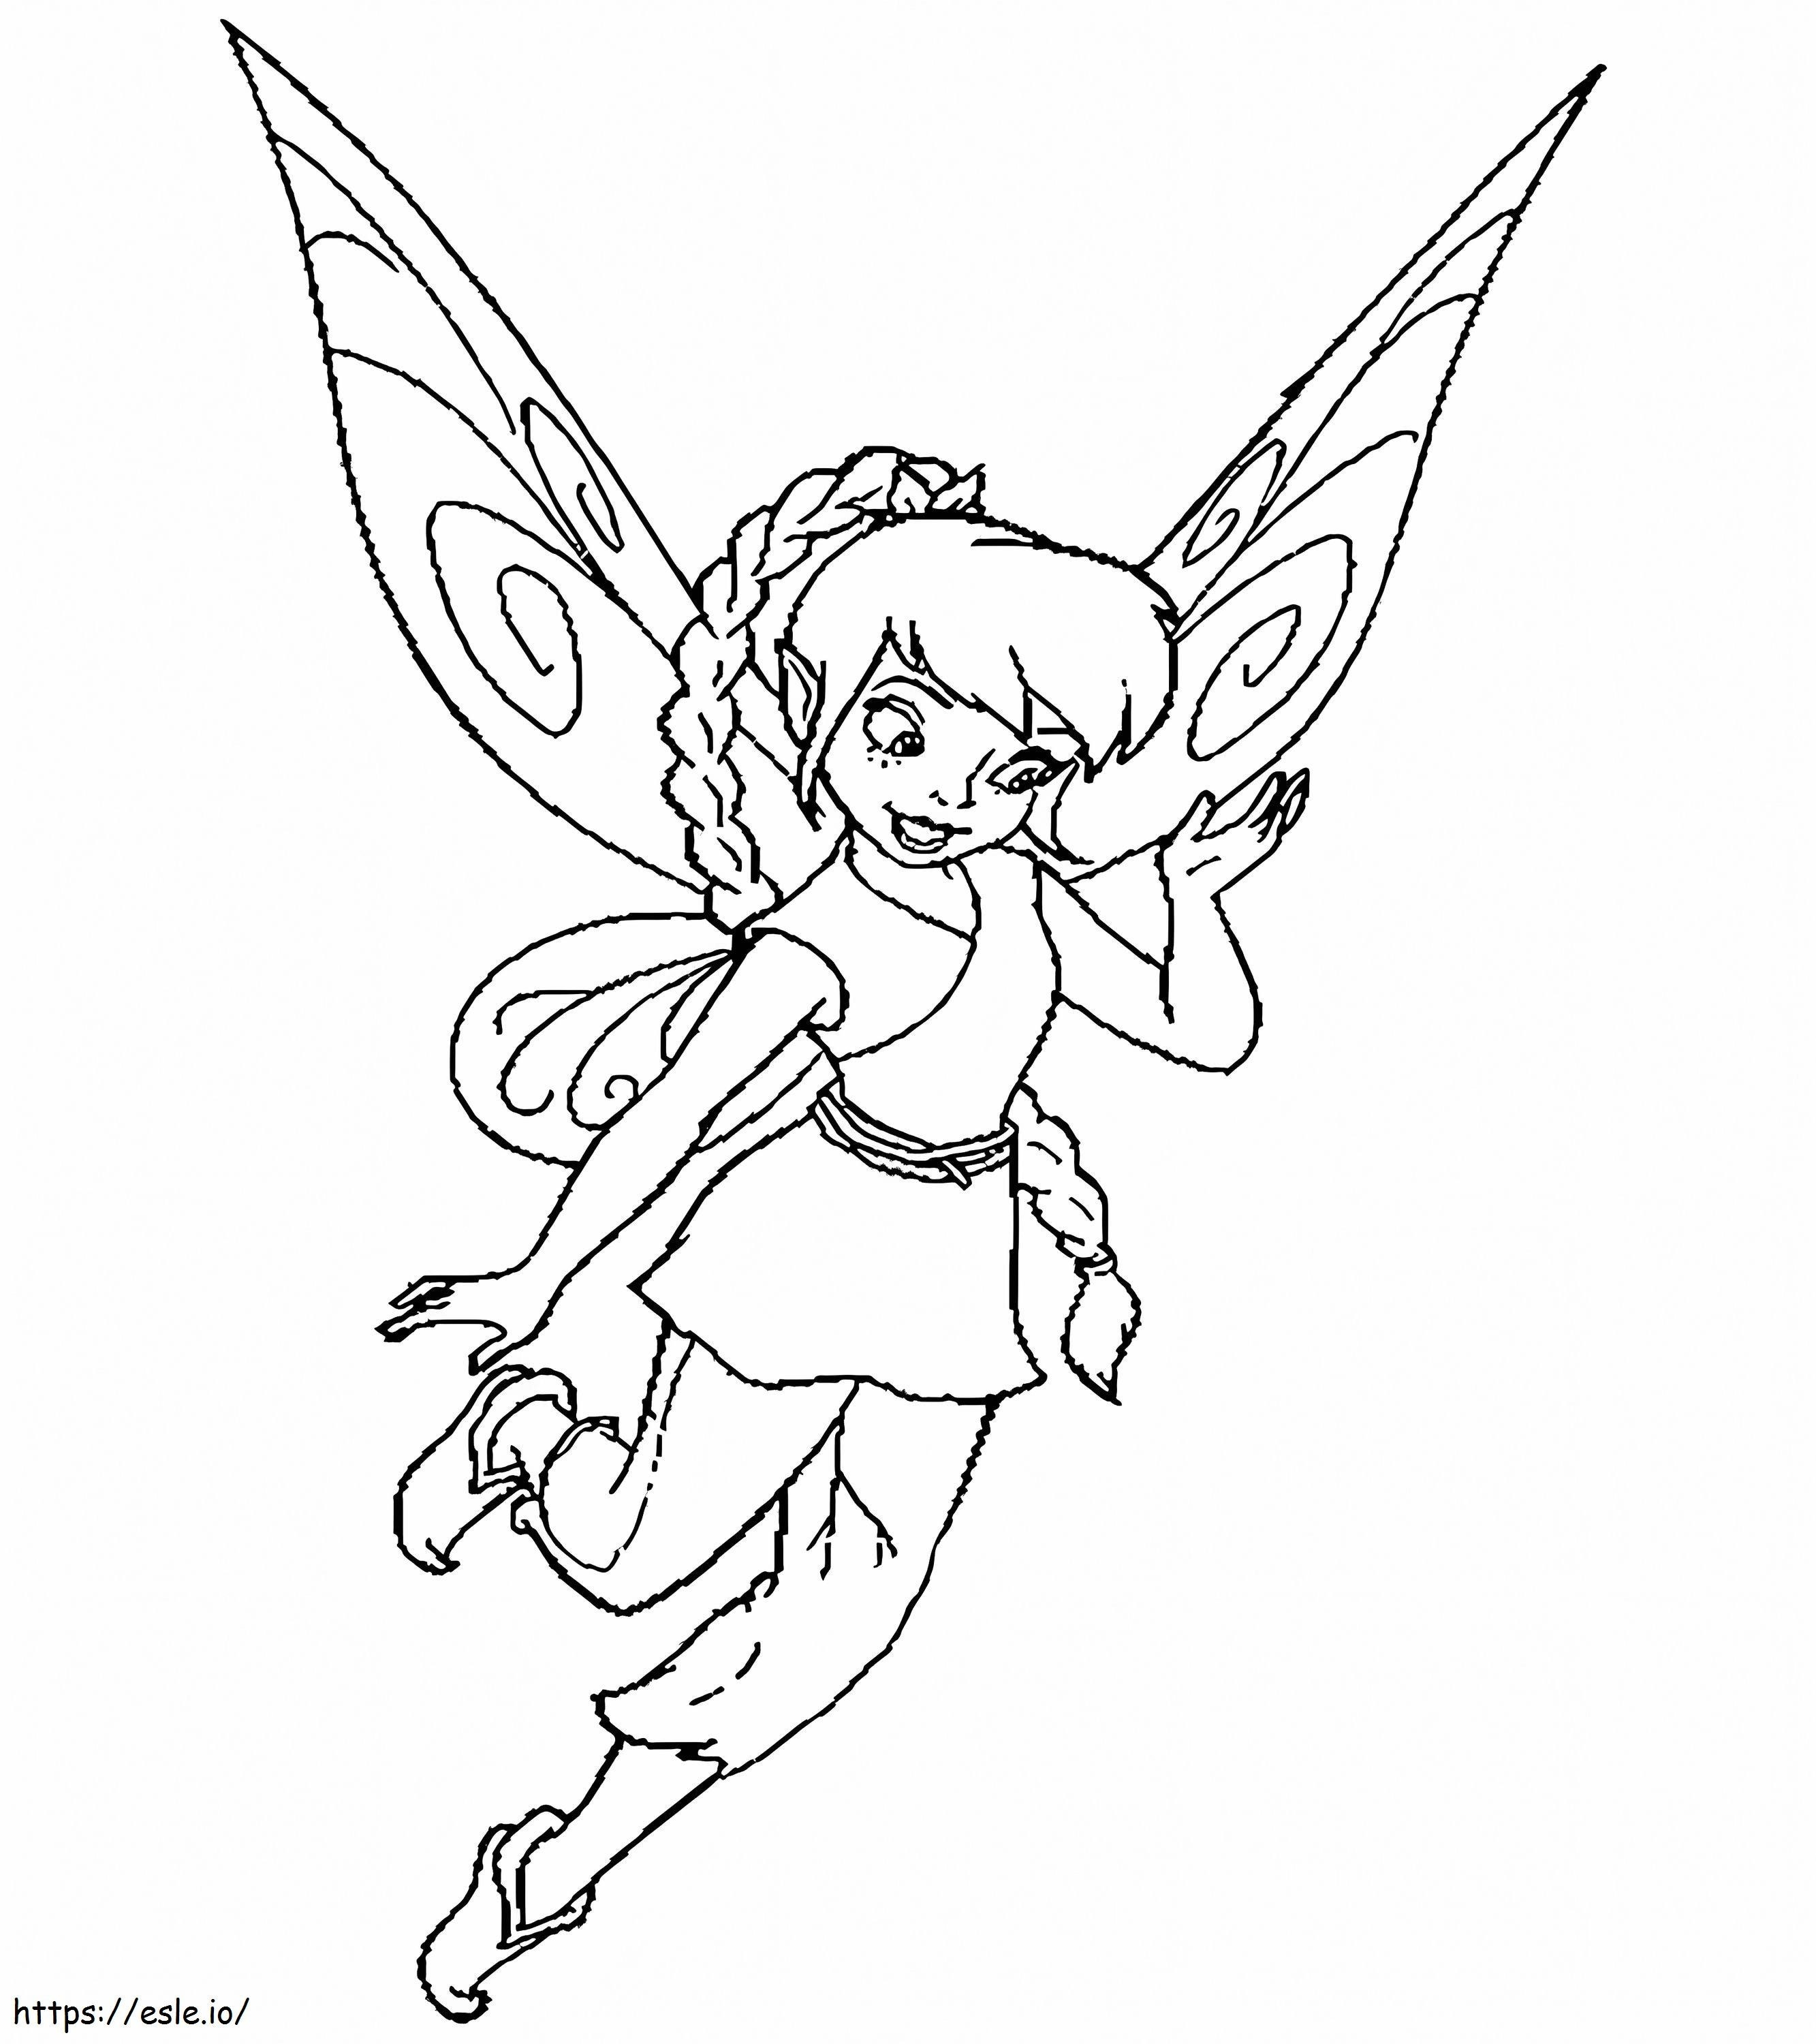 Normal Tinkerbell coloring page